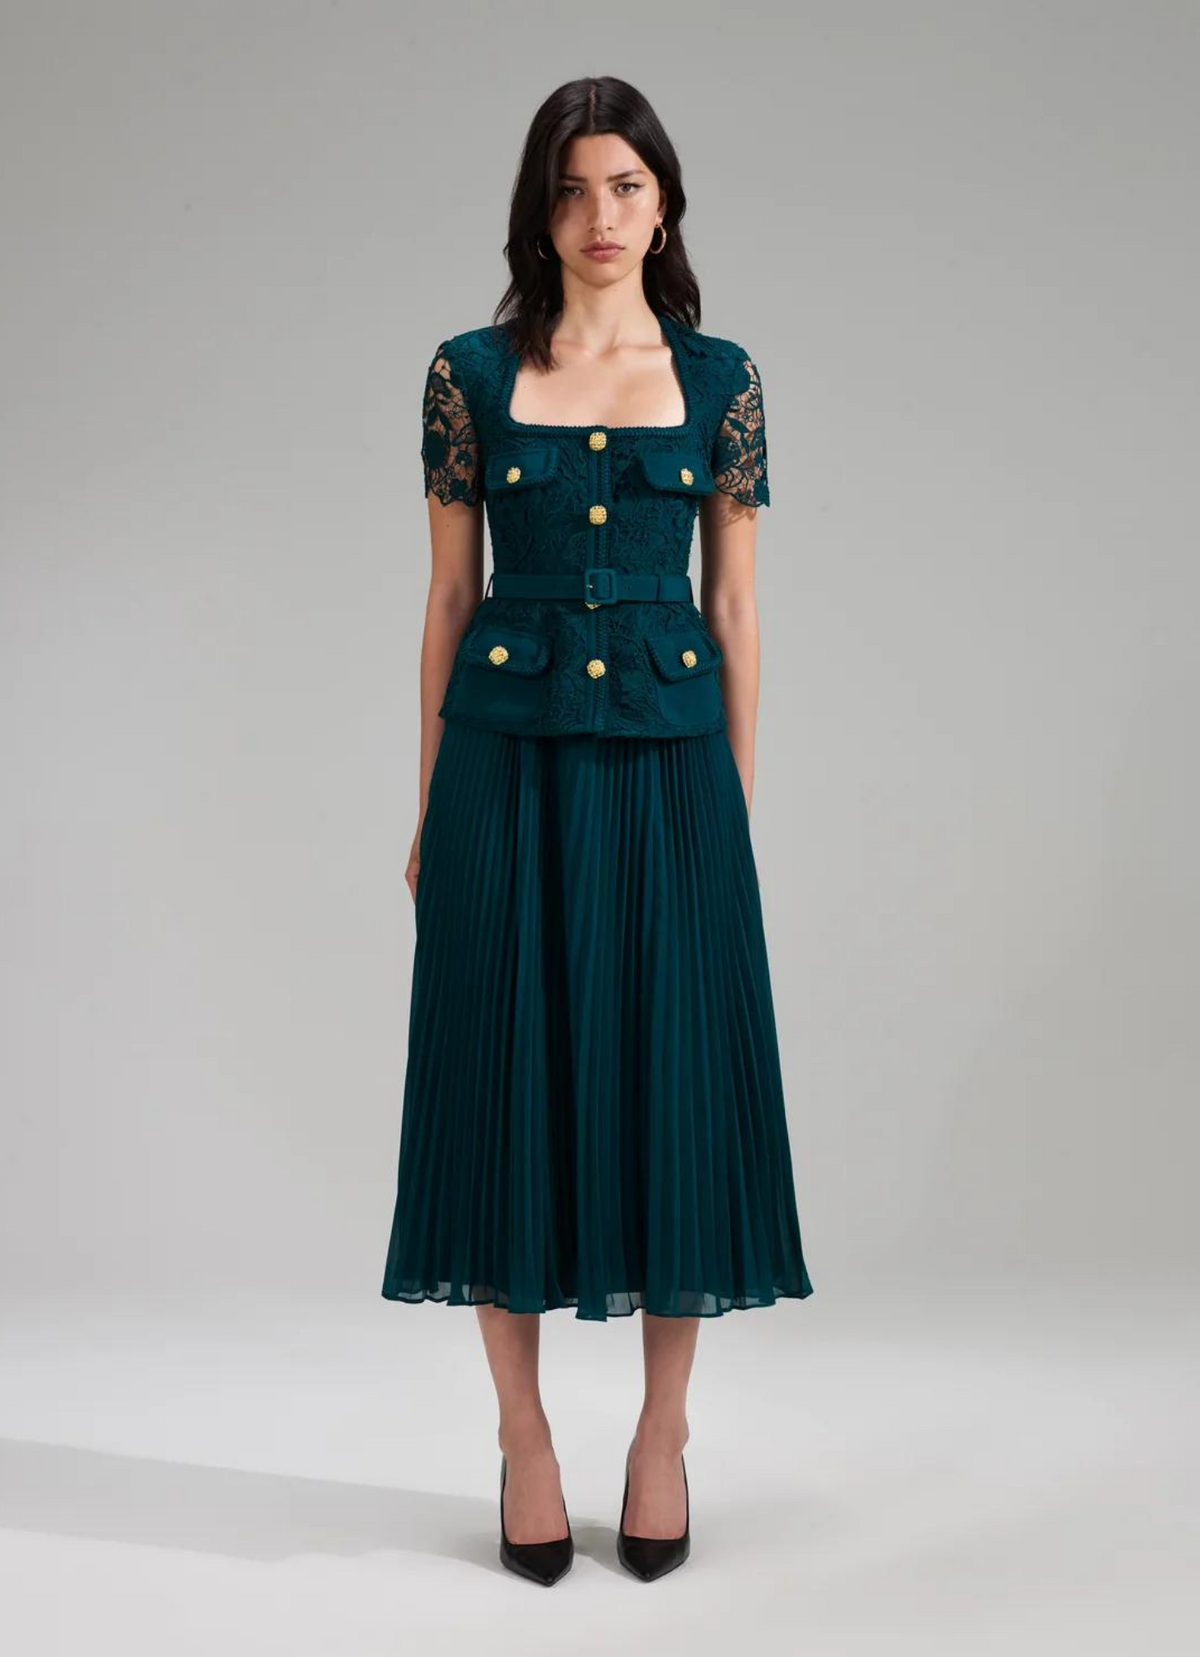 Teal dress with short lace sleeves gold hardware and pleated chiffon midi skirt and detachable belt